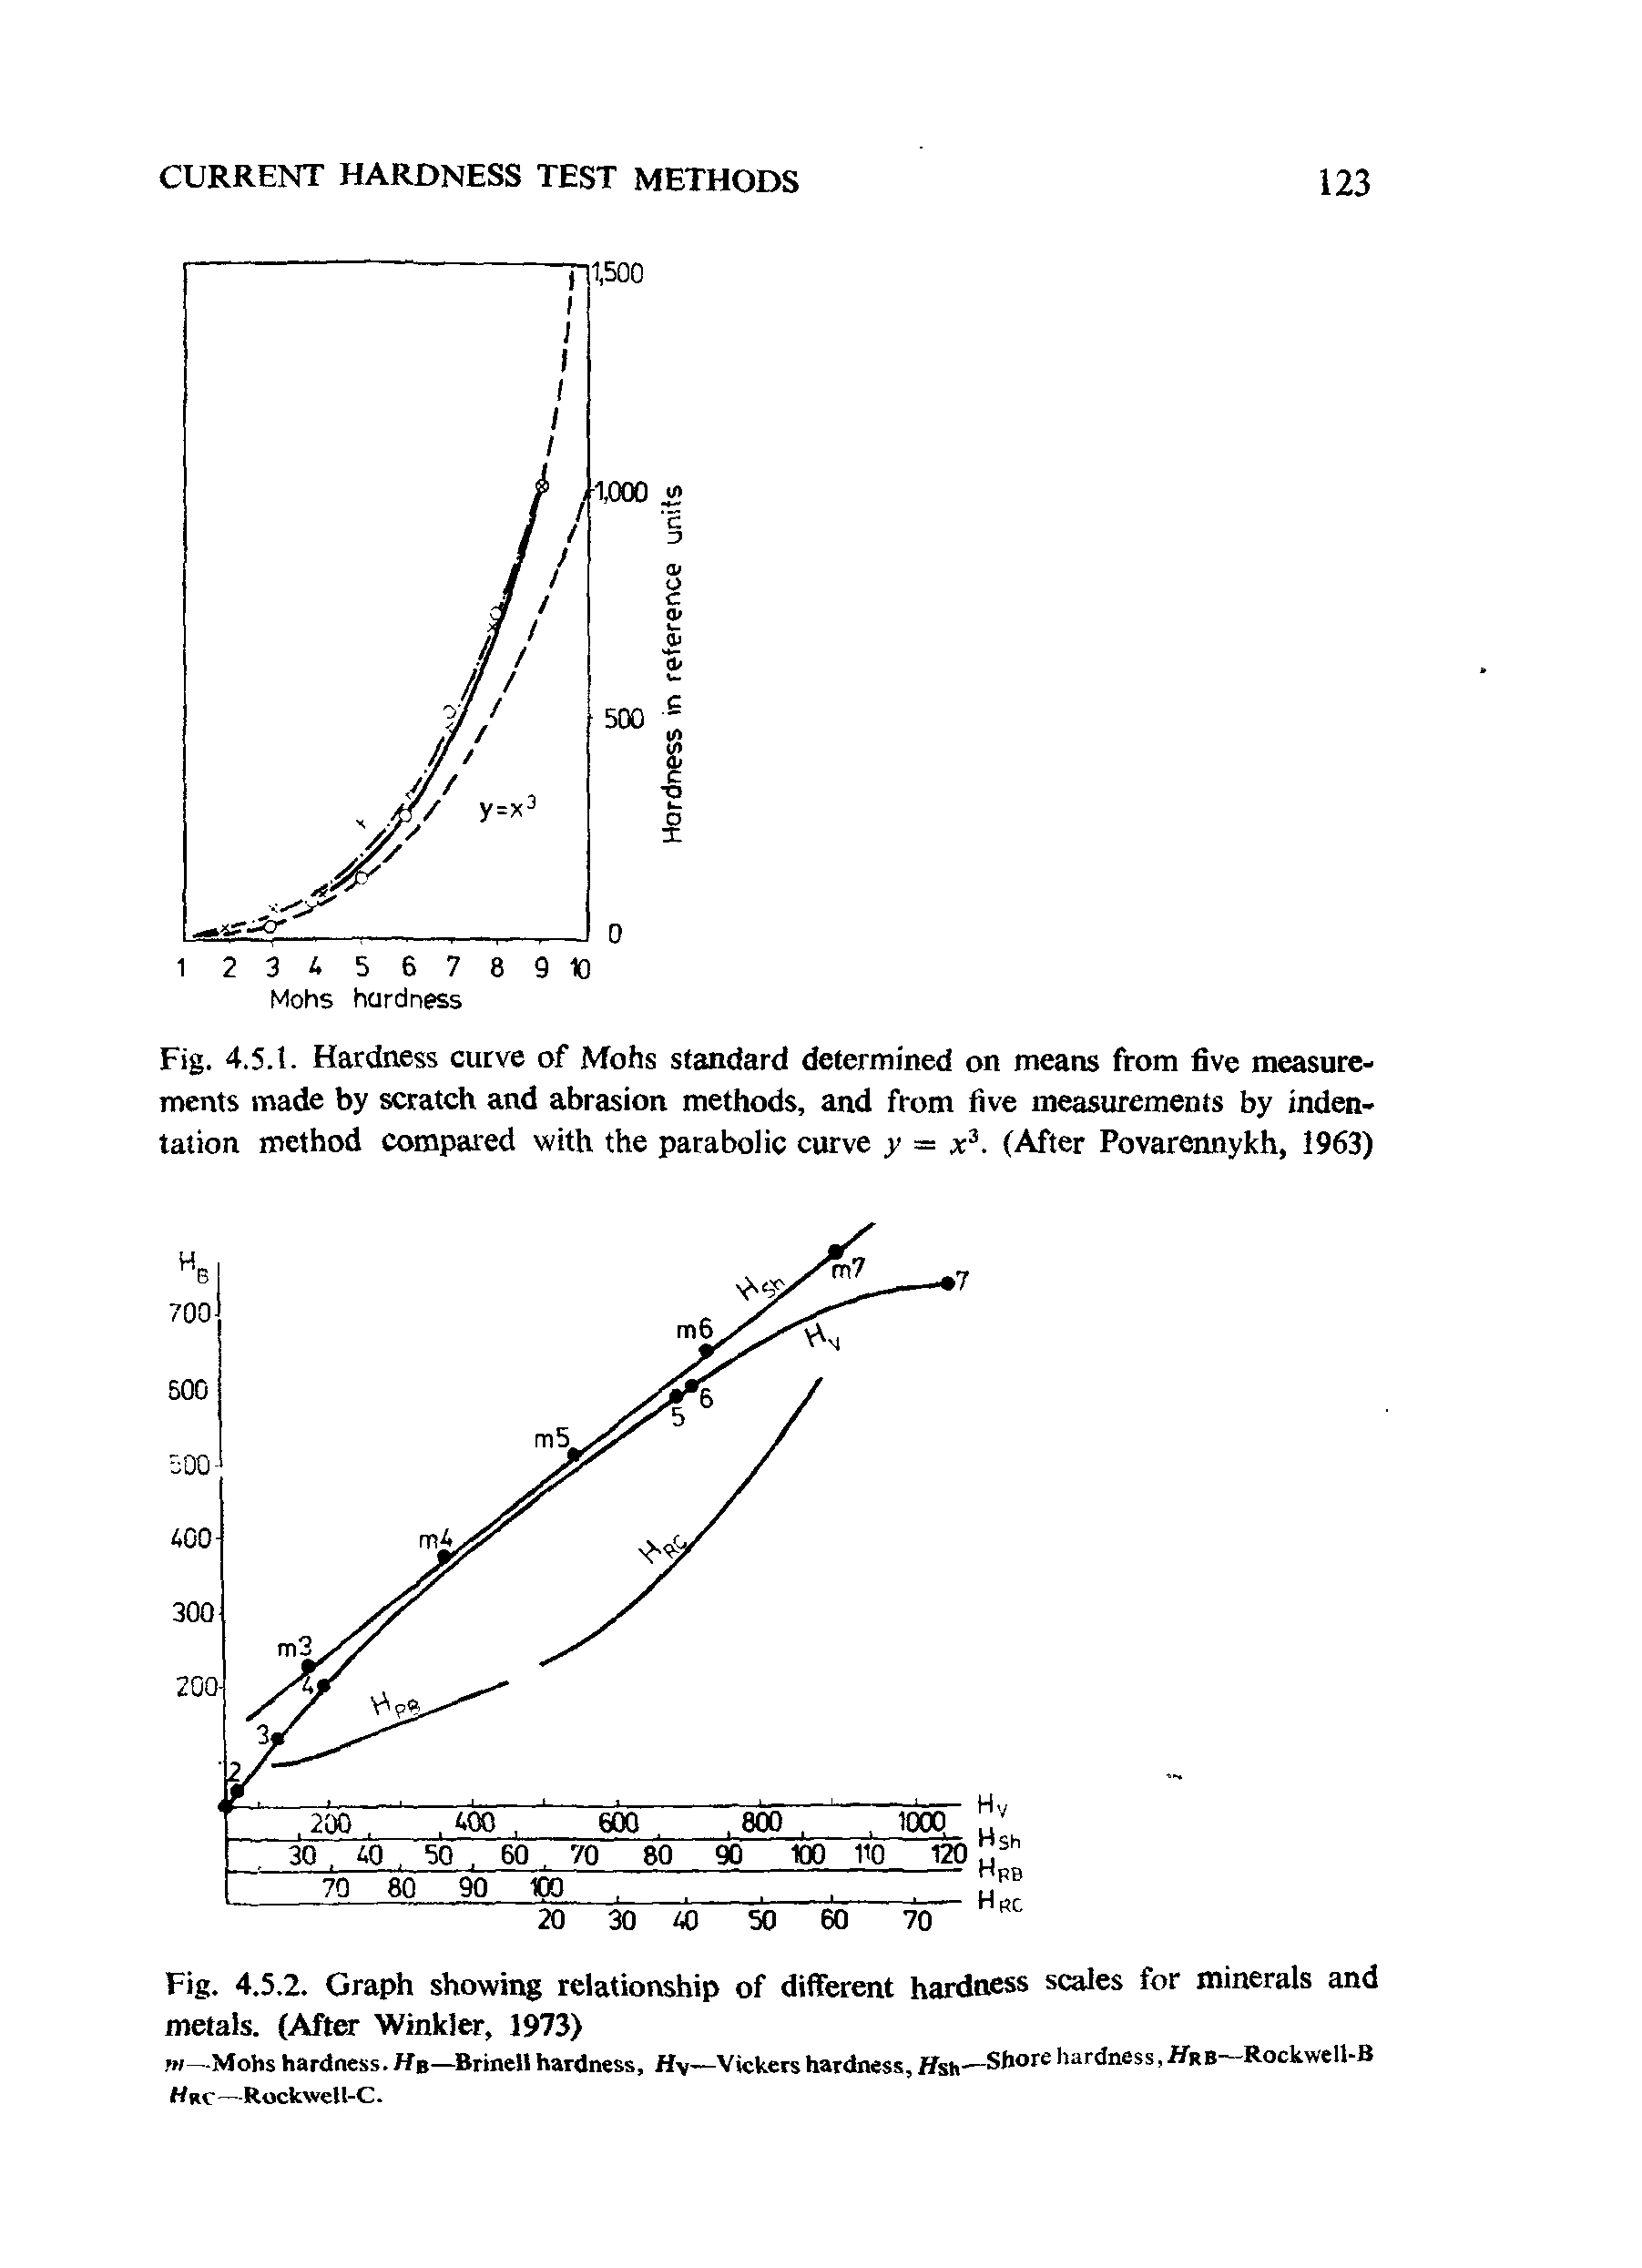 Fig. 4.5.1. Hardness curve of Mohs standard determined on means from five measurements made by scratch and abrasion methods, and from five measurements by indentation method compared with the parabolic curve y = x3. (After Povarennykh, 1963)...